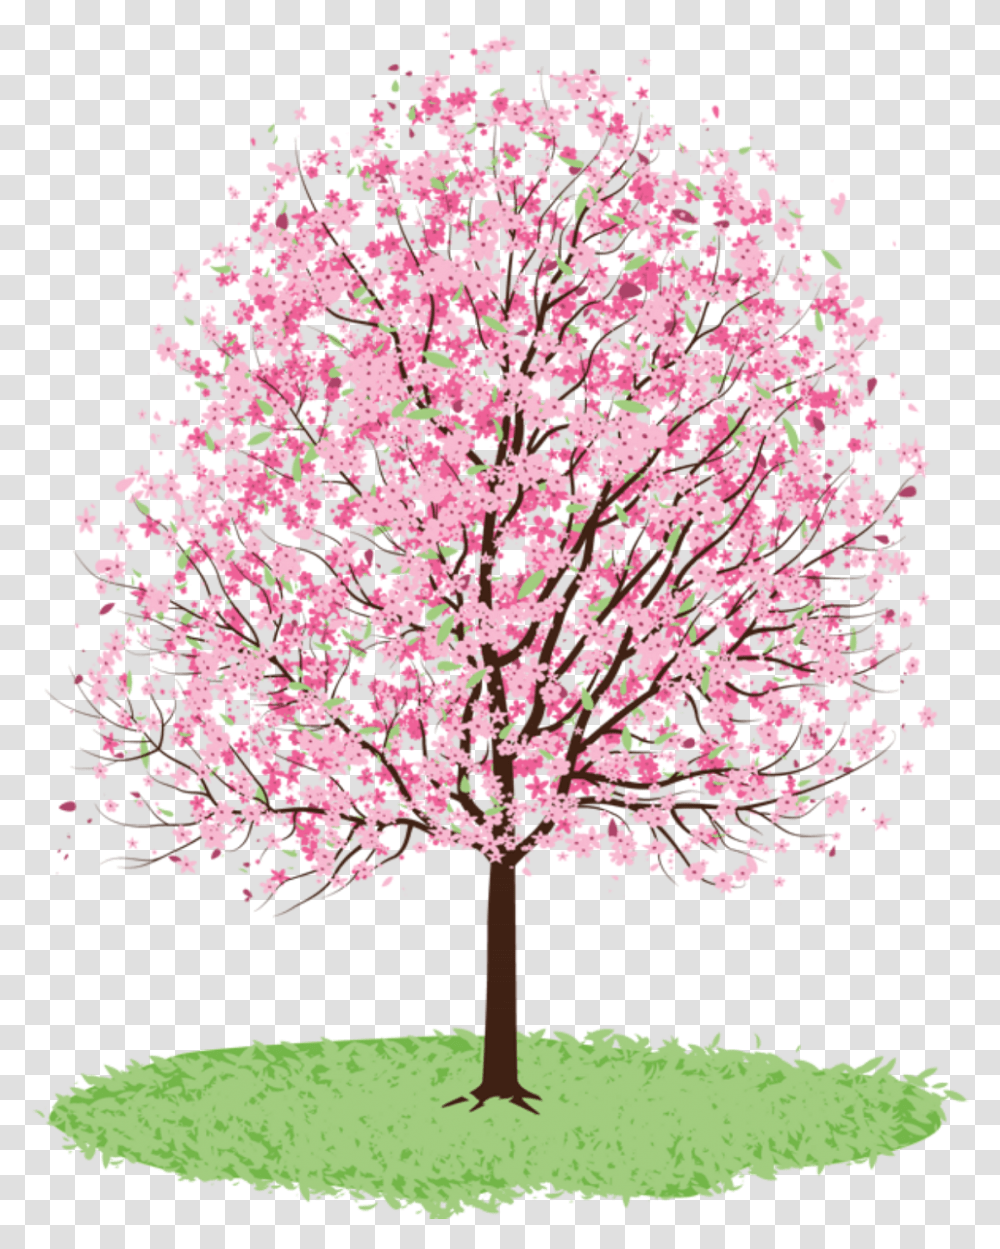 Ftestickers Clipart Watercolor Illustration Cherrybloss Clip Art Spring Tree, Plant, Flower, Blossom, Cherry Blossom Transparent Png